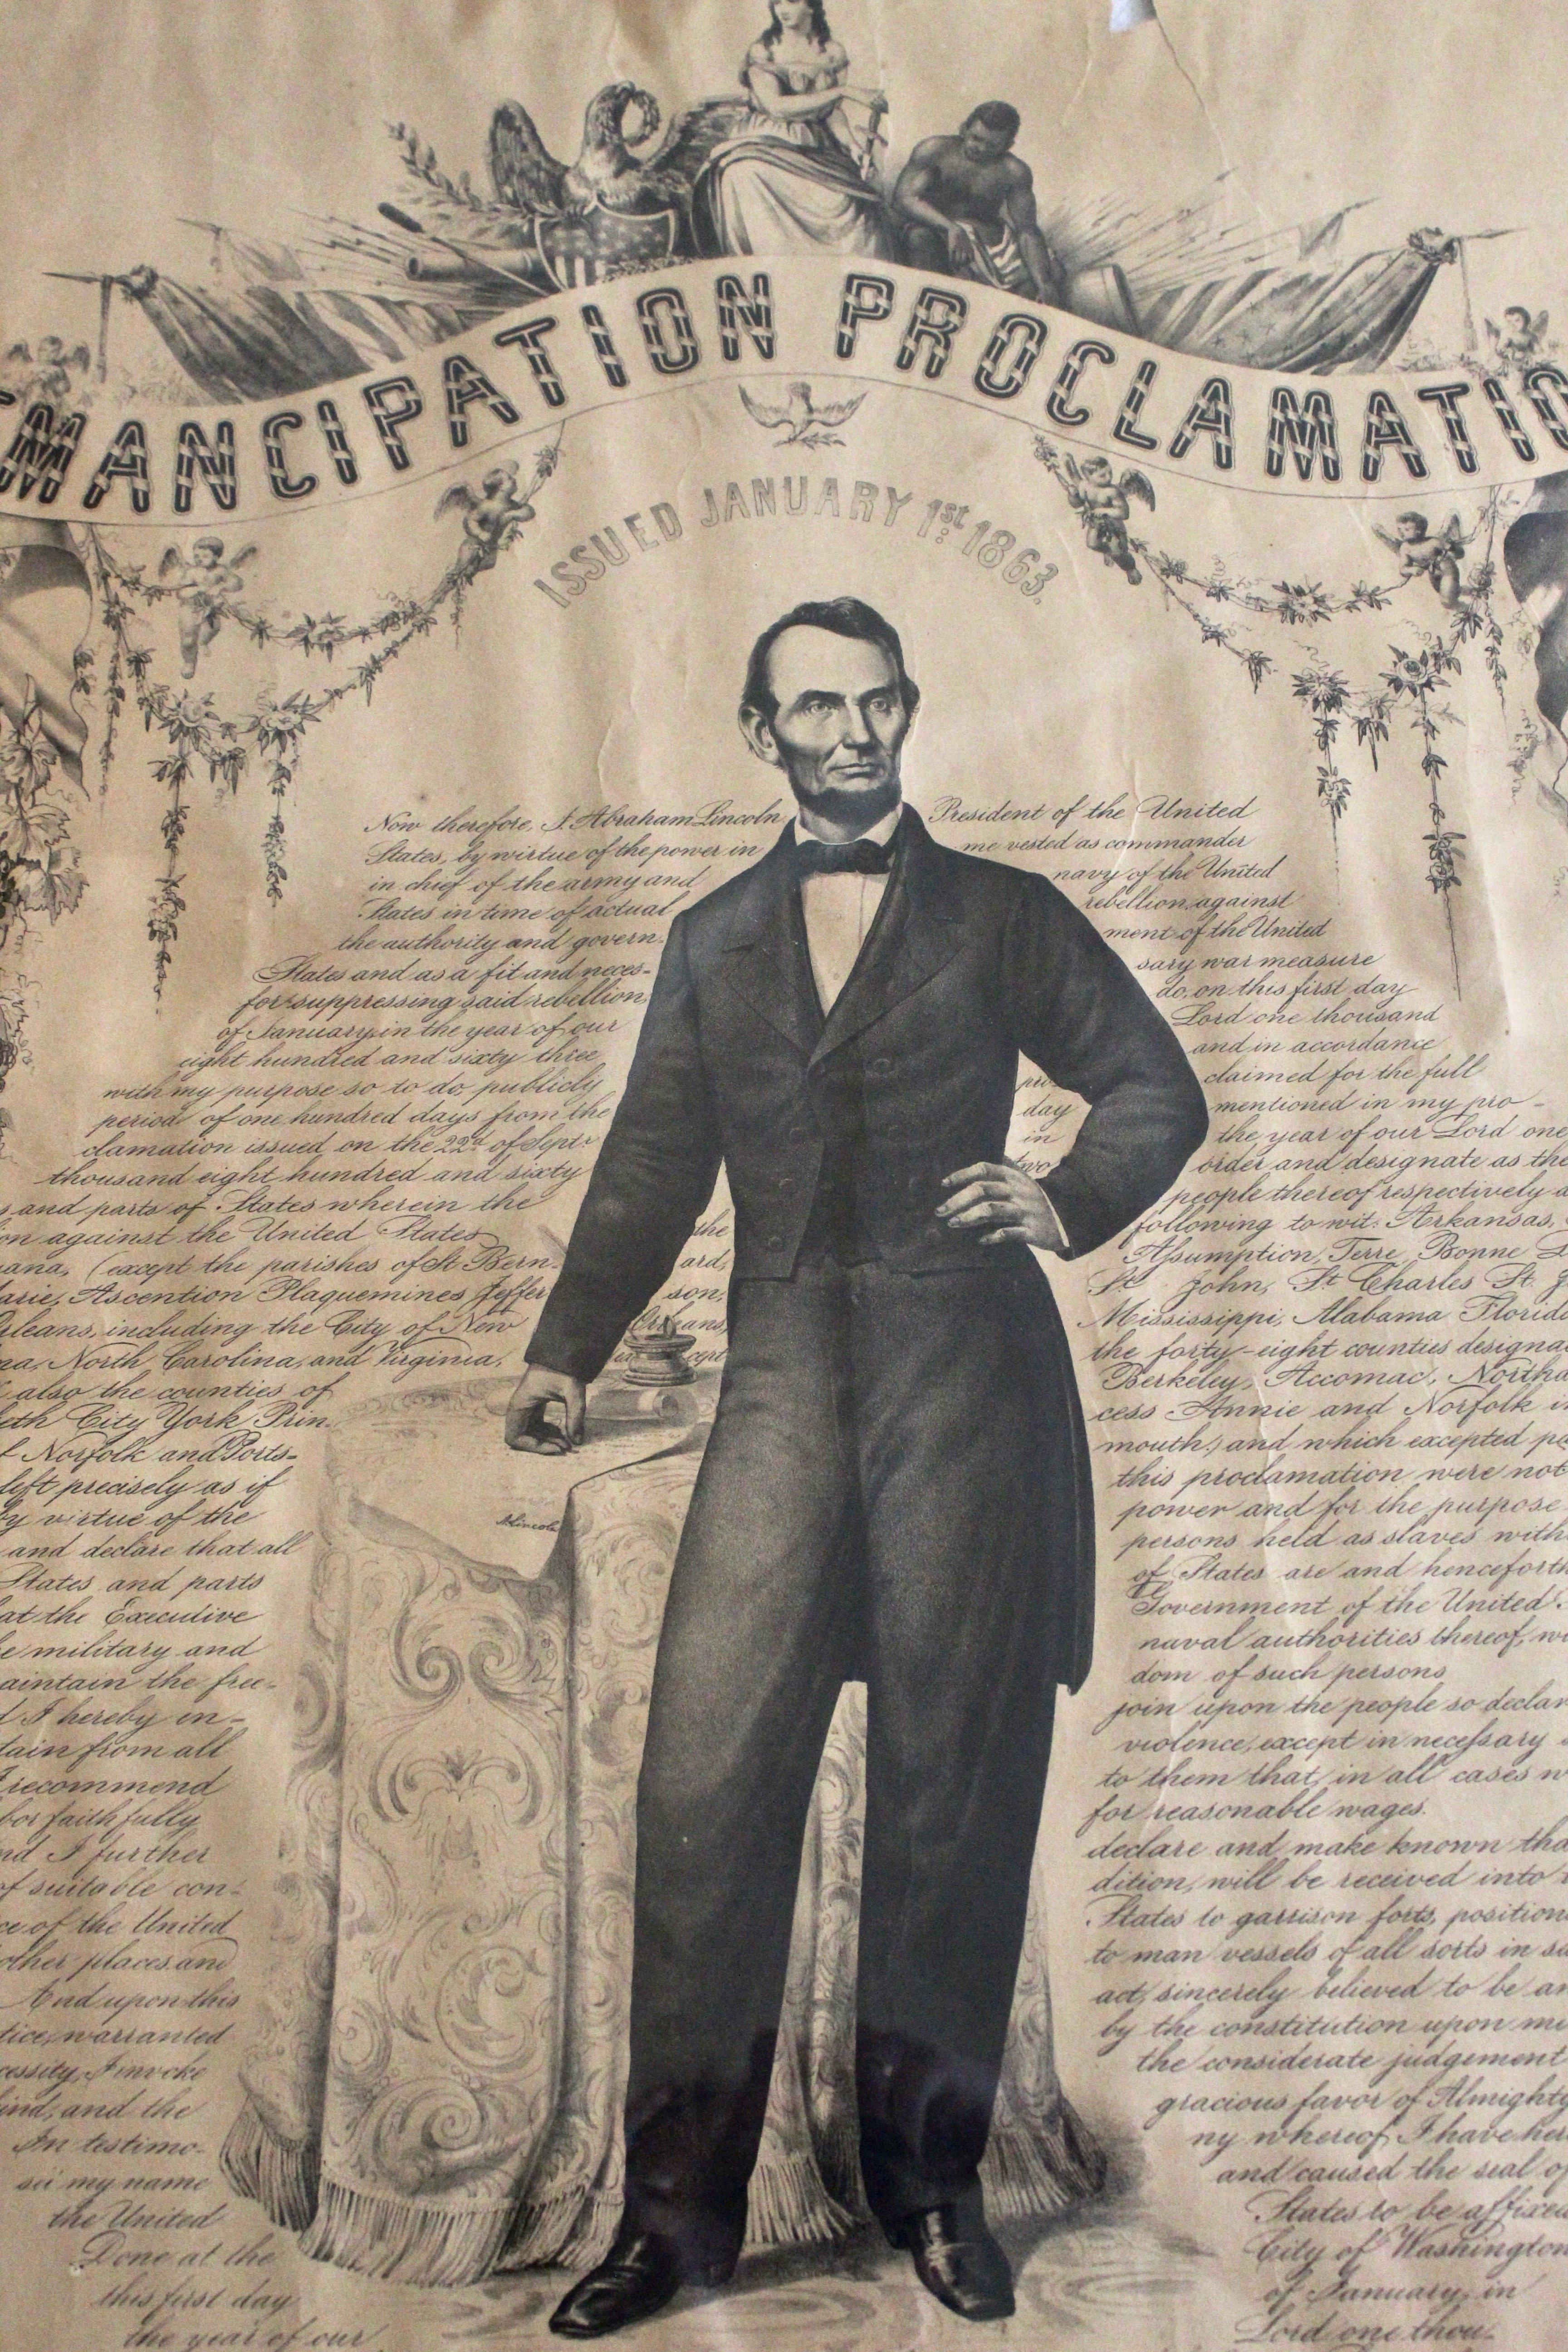 Presented is a lithographic broadside of the text of the Emancipation Proclamation issued on January 1, 1863. This broadside was published in Philadelphia by G.R. Russell, 1865. A full-length portrait of Abraham Lincoln is surrounded by the text of